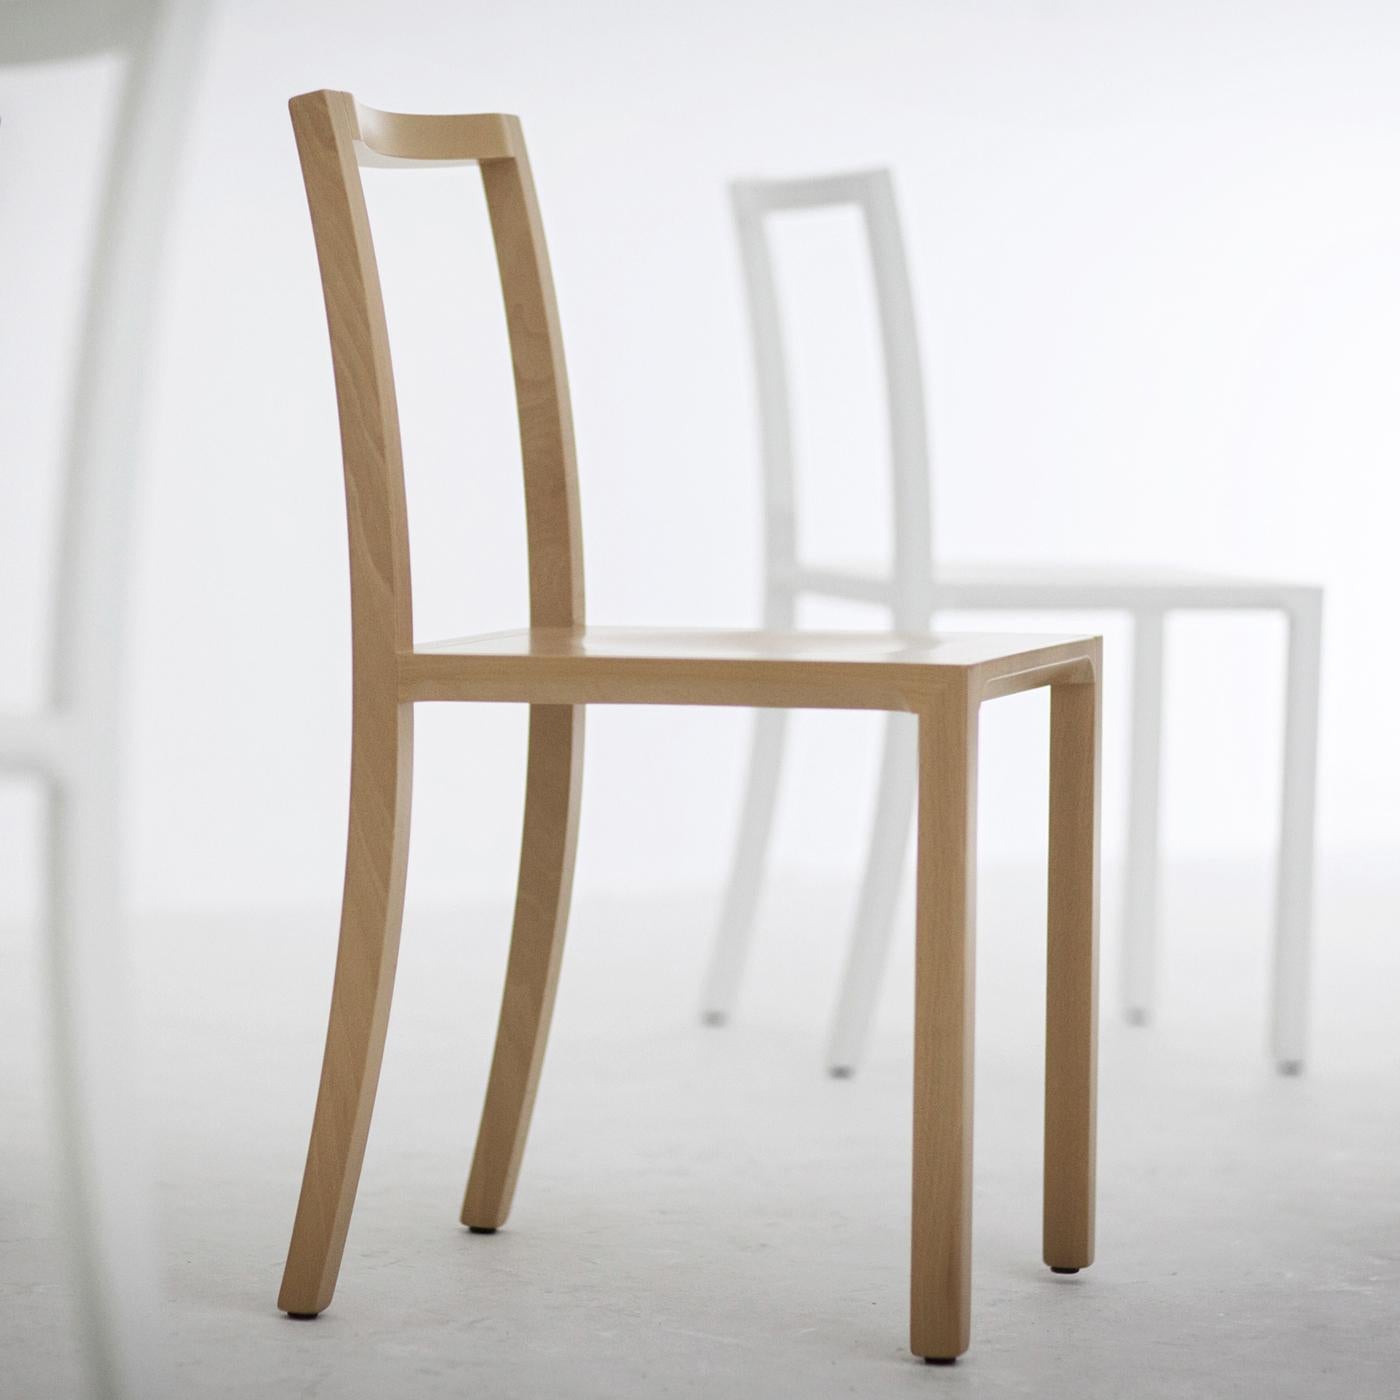 This captivating set of two chairs was designed by Steffen Kehrle for the Framework collection, which takes inspiration from the concept of customization of various clean and essential types of designs to comply with specific needs. Each chair of